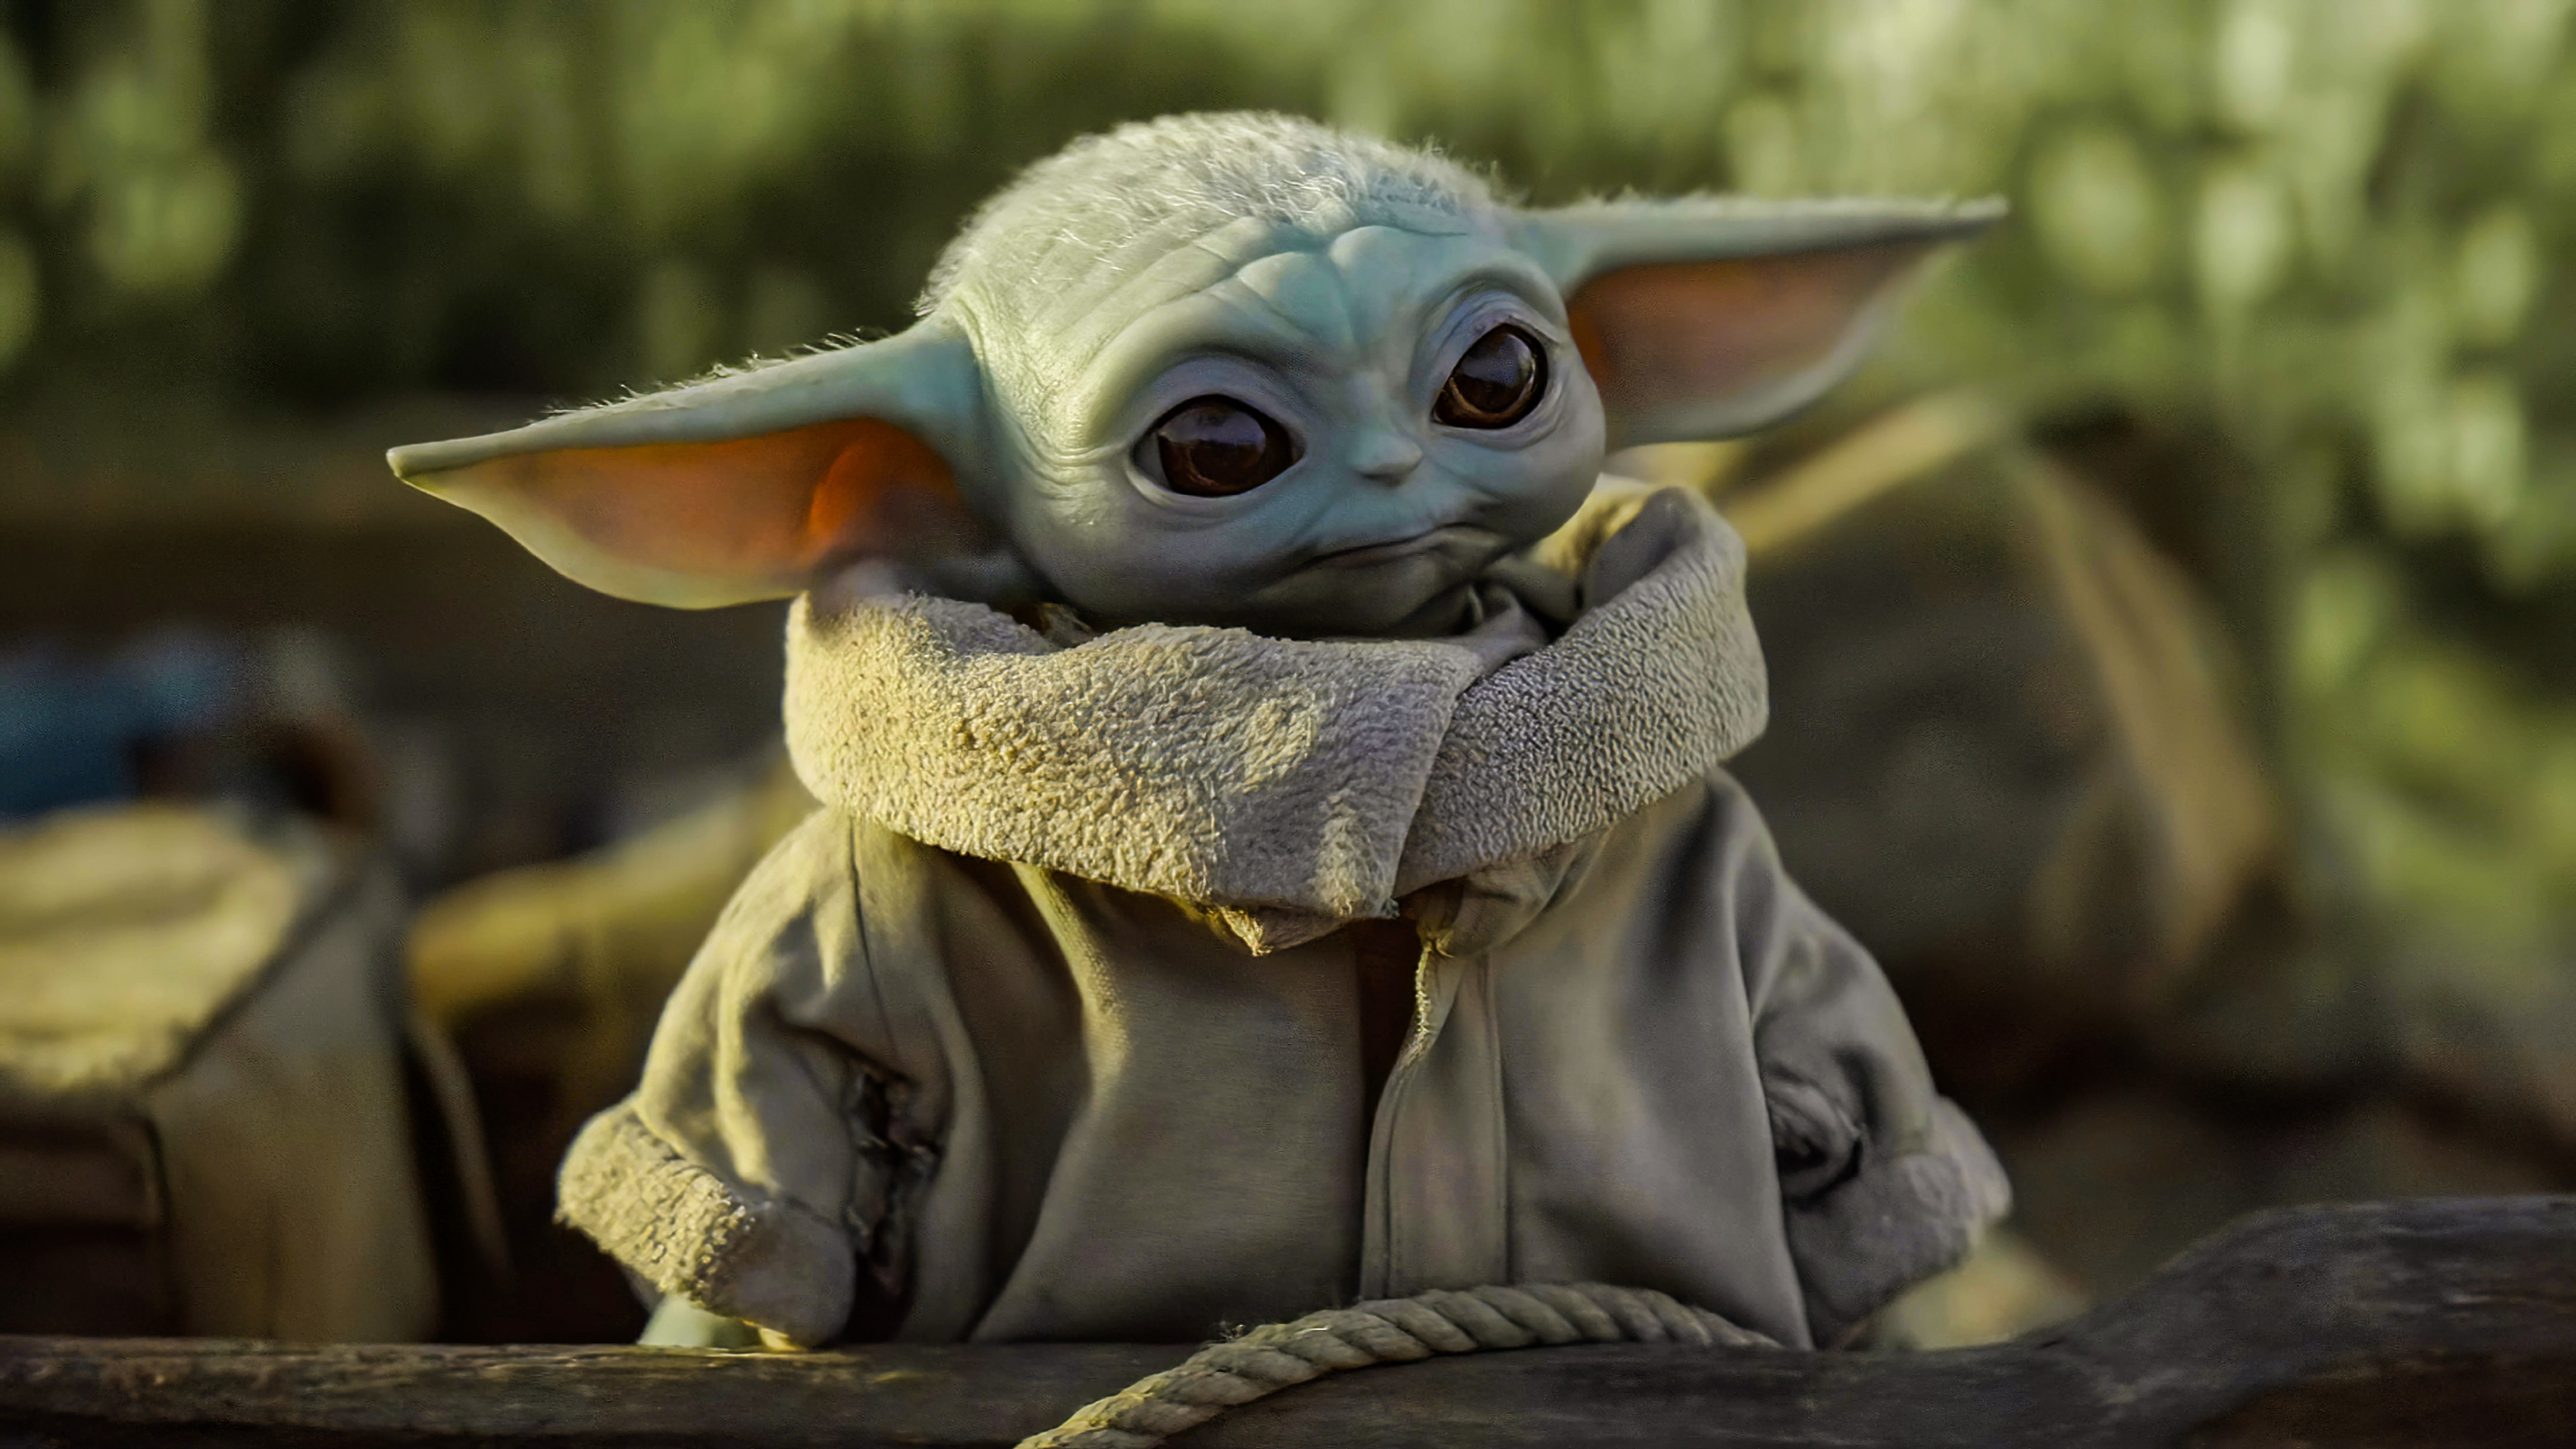 1280x800 Star Wars Baby Yoda 2 1280x800 Resolution Wallpaper Hd Tv Series 4k Wallpapers Images Photos And Background Wallpapers Den